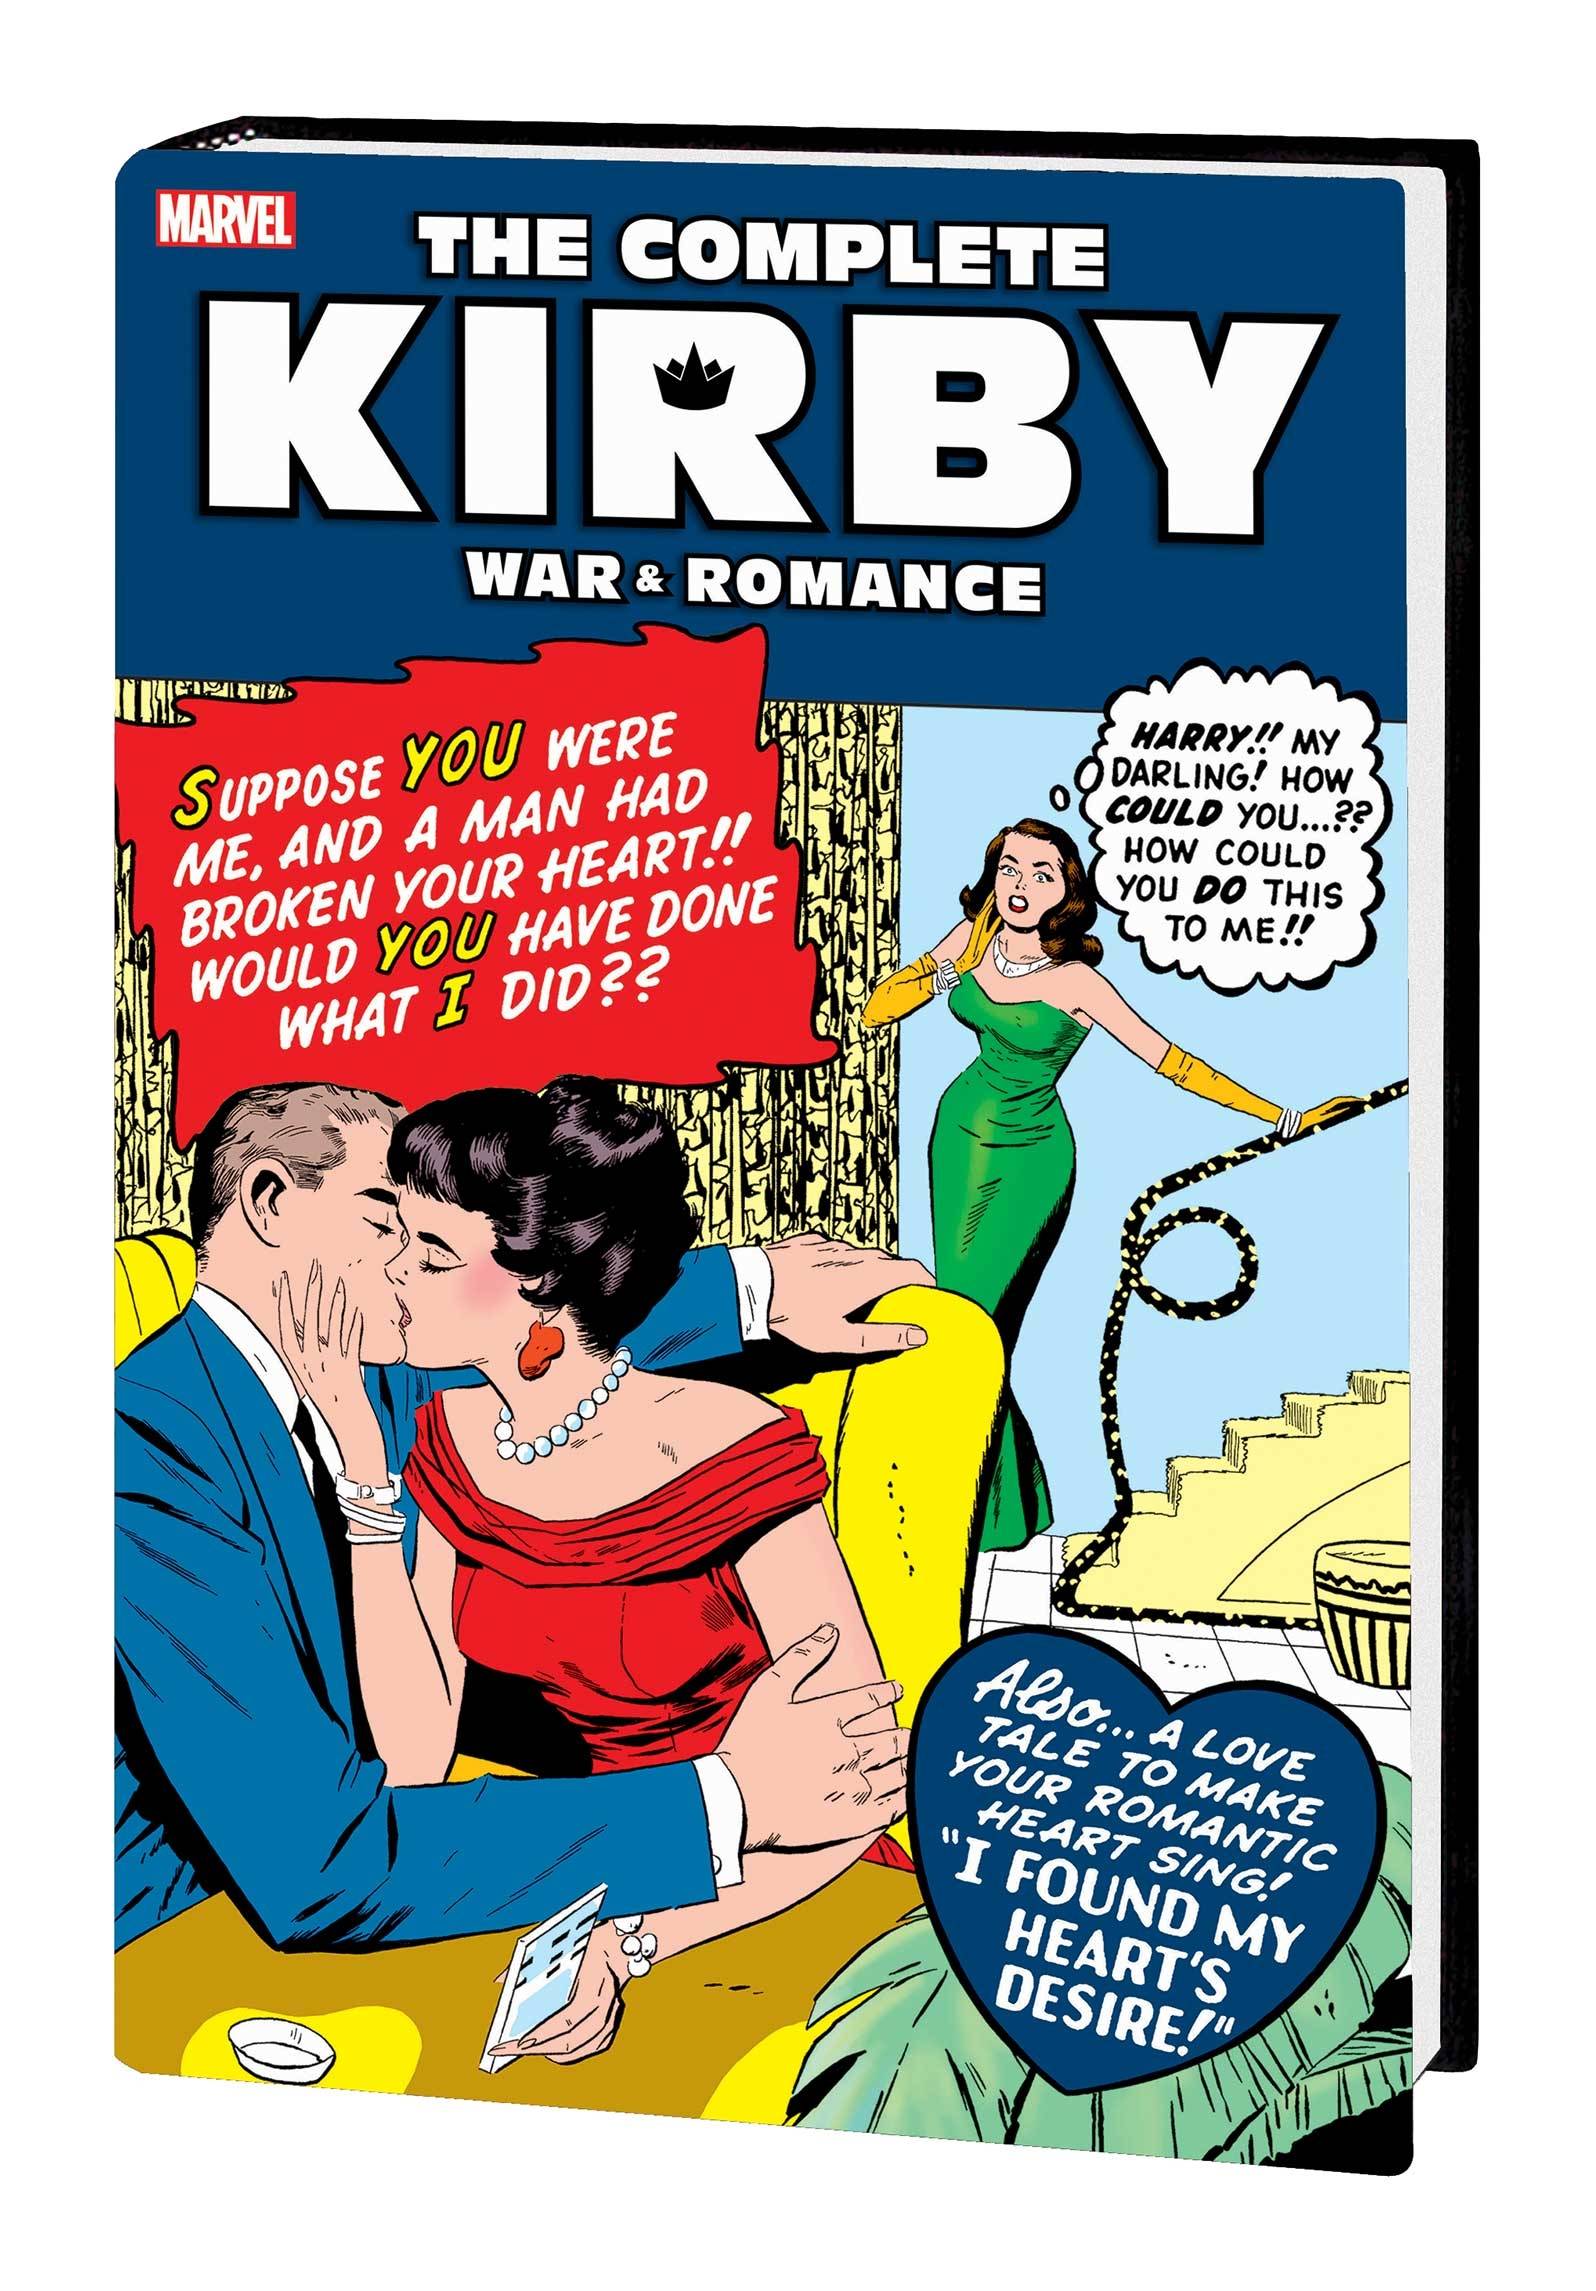 COMPLETE KIRBY WAR AND ROMANCE HC